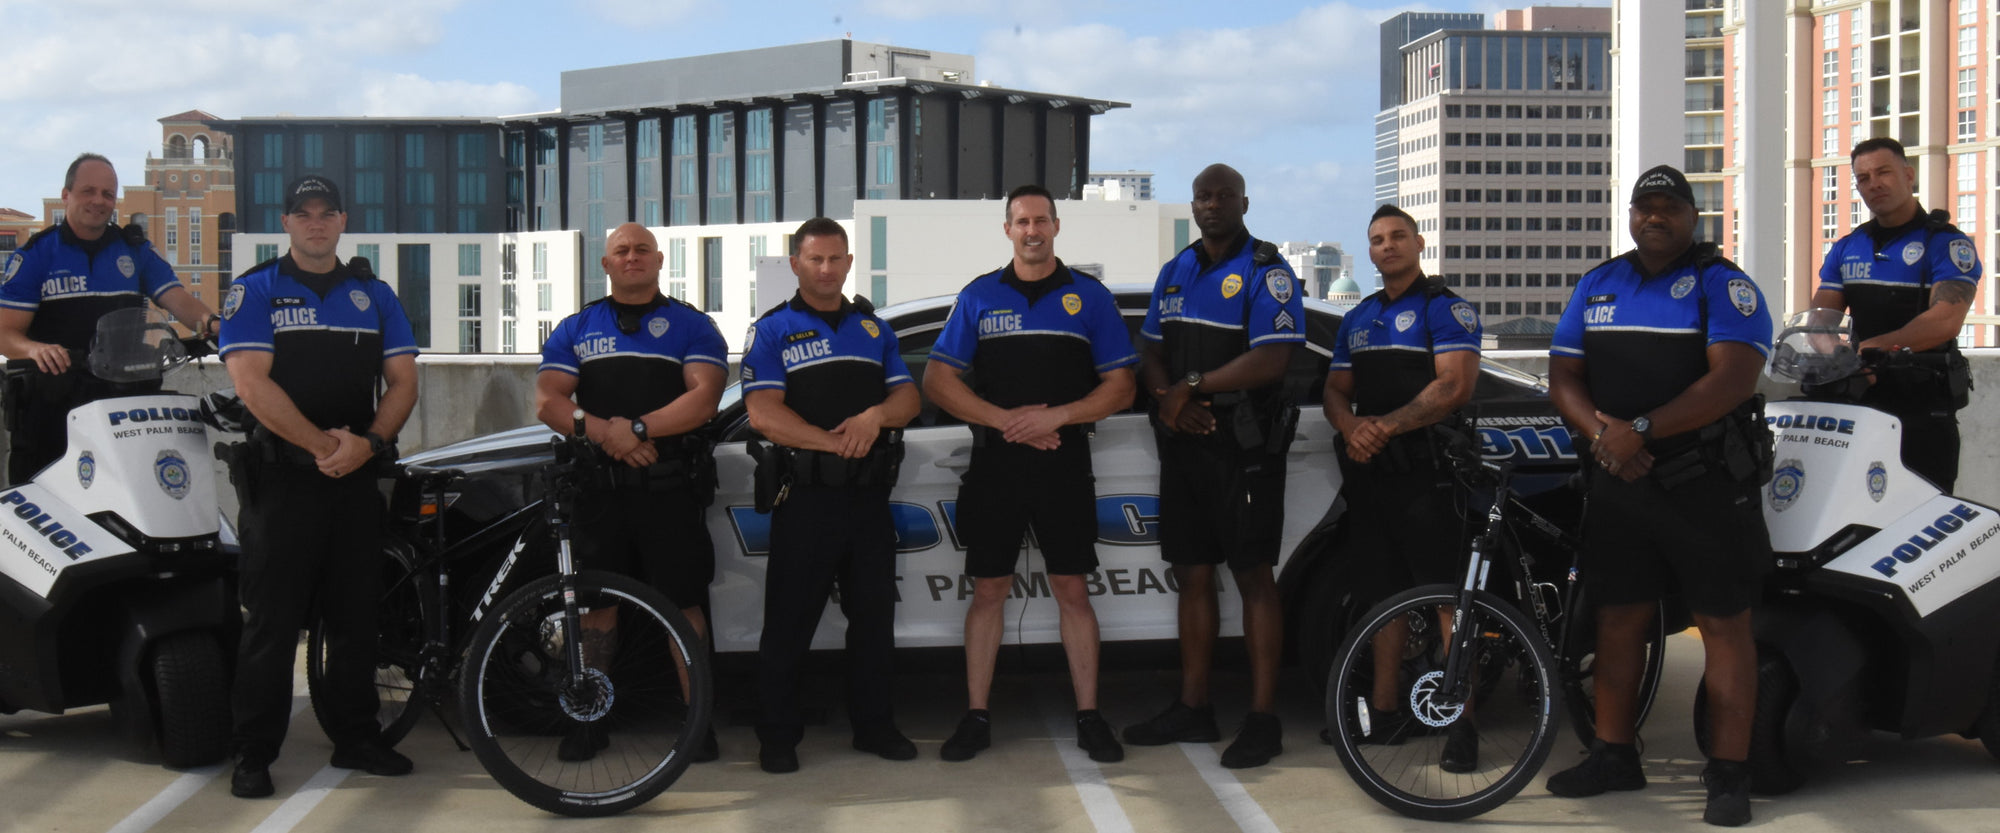 Palm Beach officers in uniform